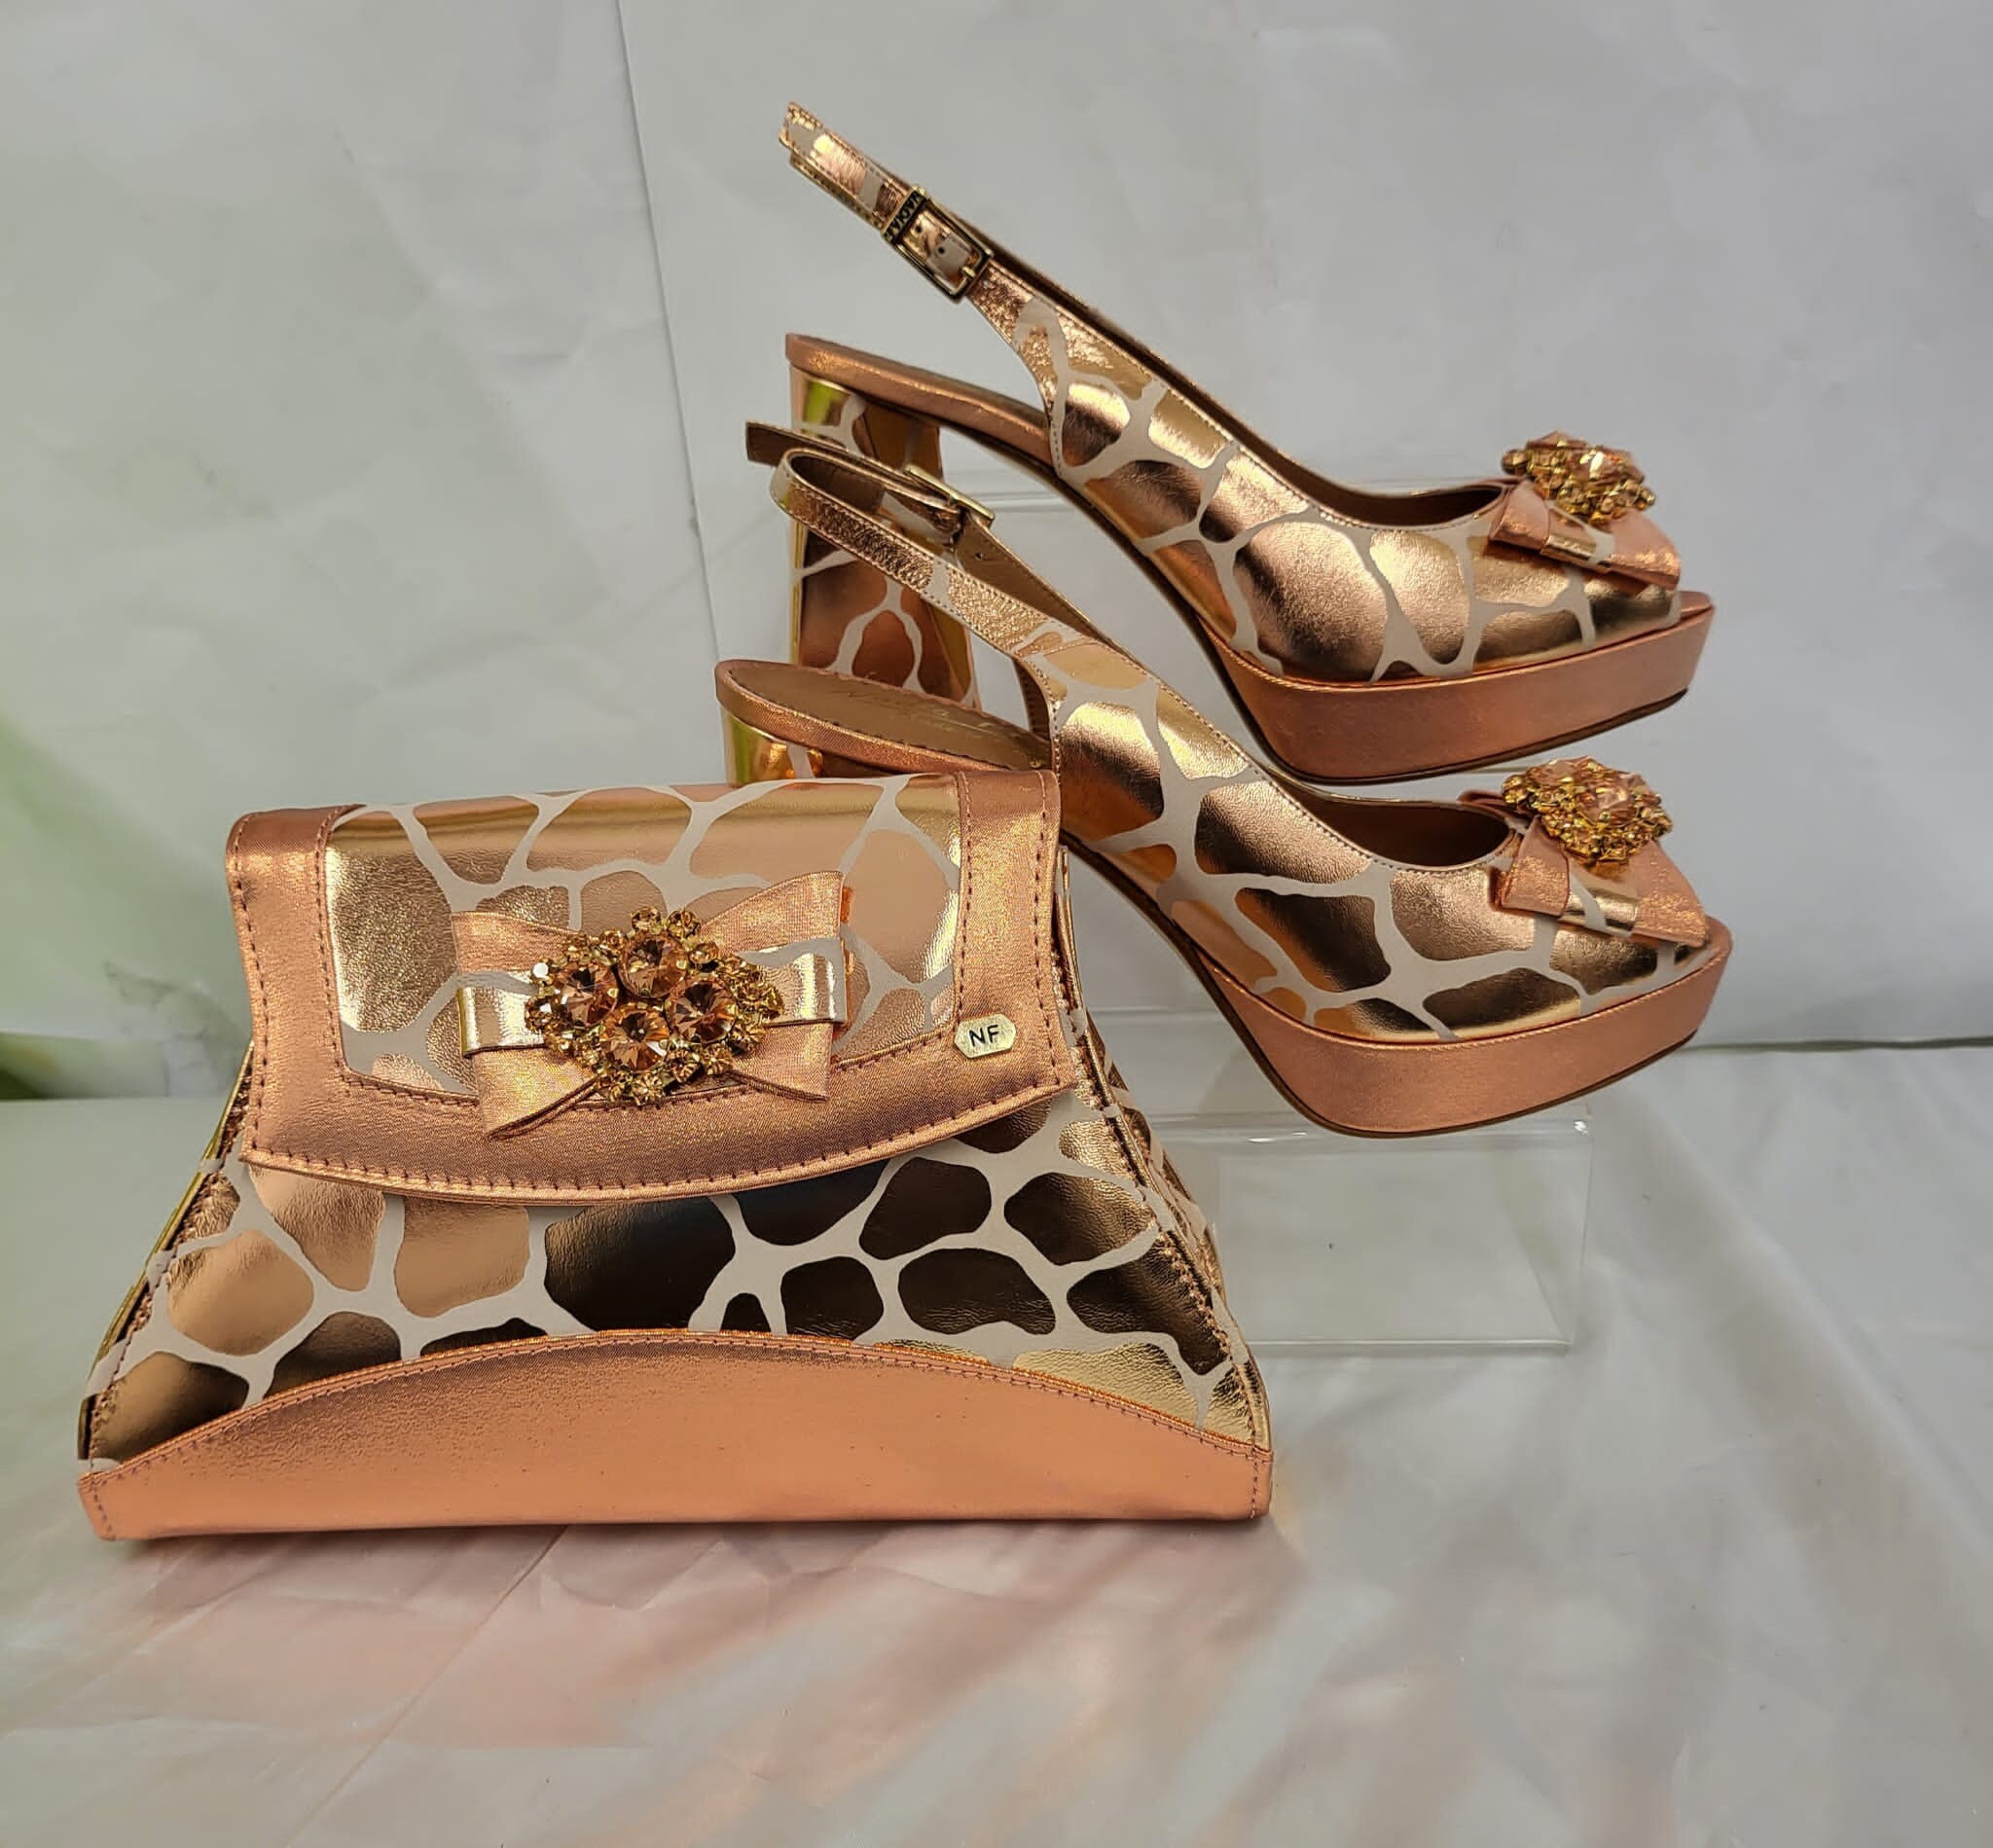 Fashion African Wedding Shoes and Bag Set for Party WH1001 - 4